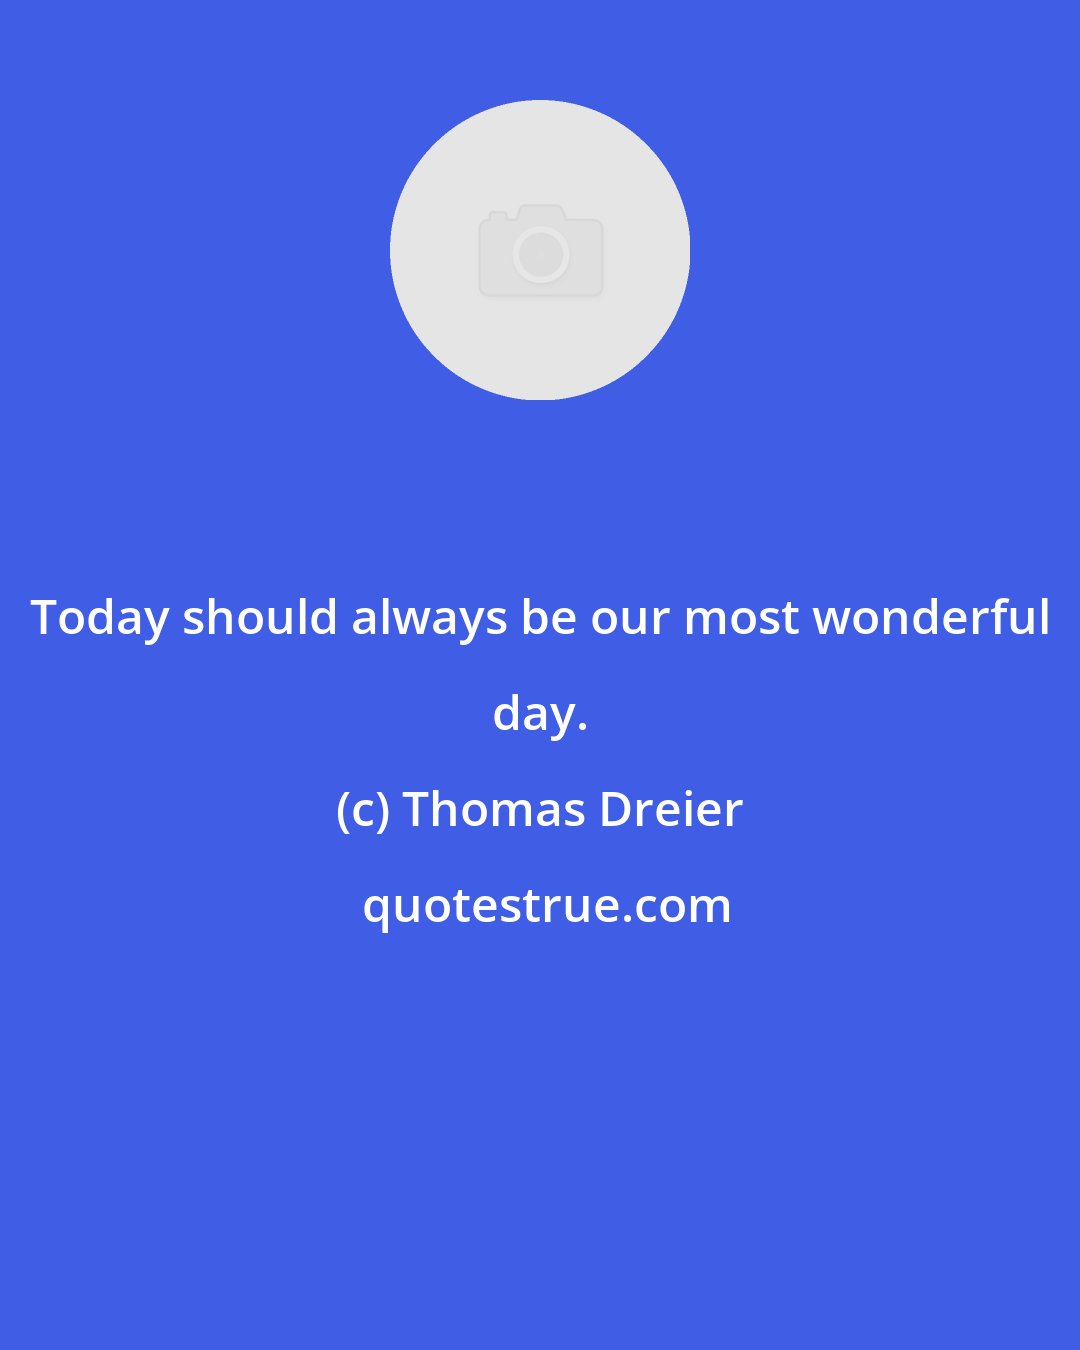 Thomas Dreier: Today should always be our most wonderful day.